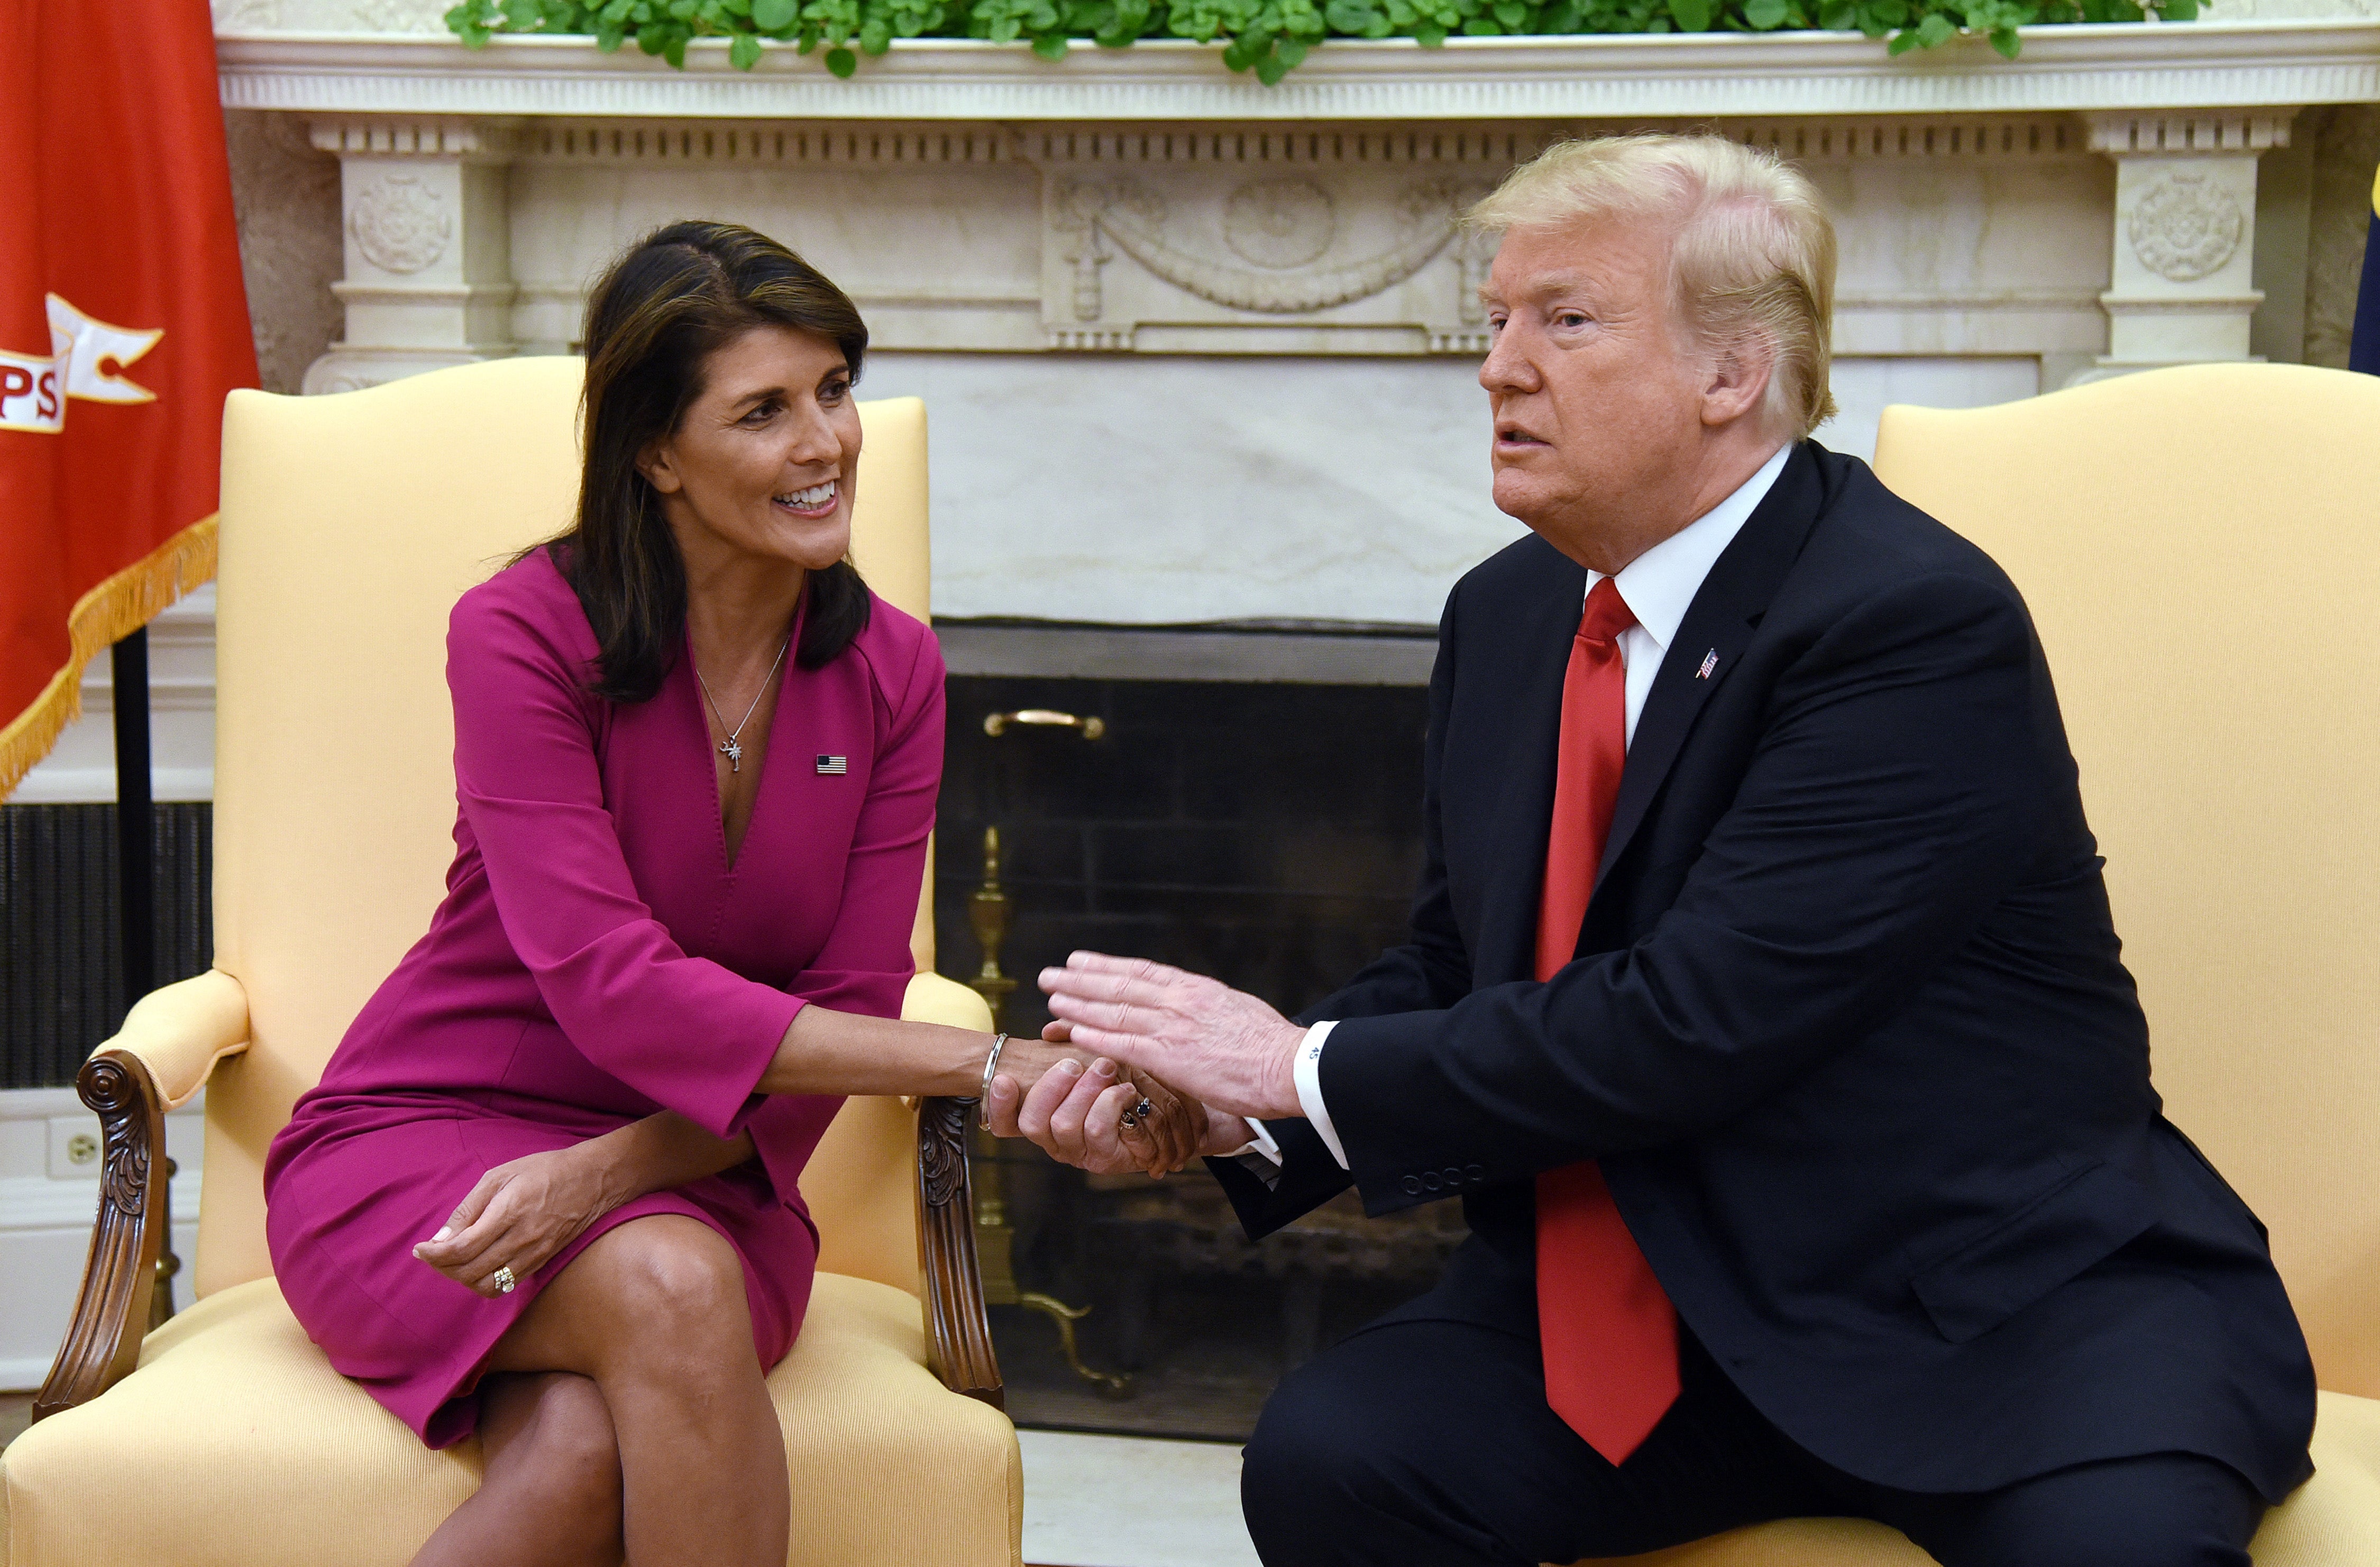 Nikki Haley announced her resignation as UN ambassador at the White House in October 2018